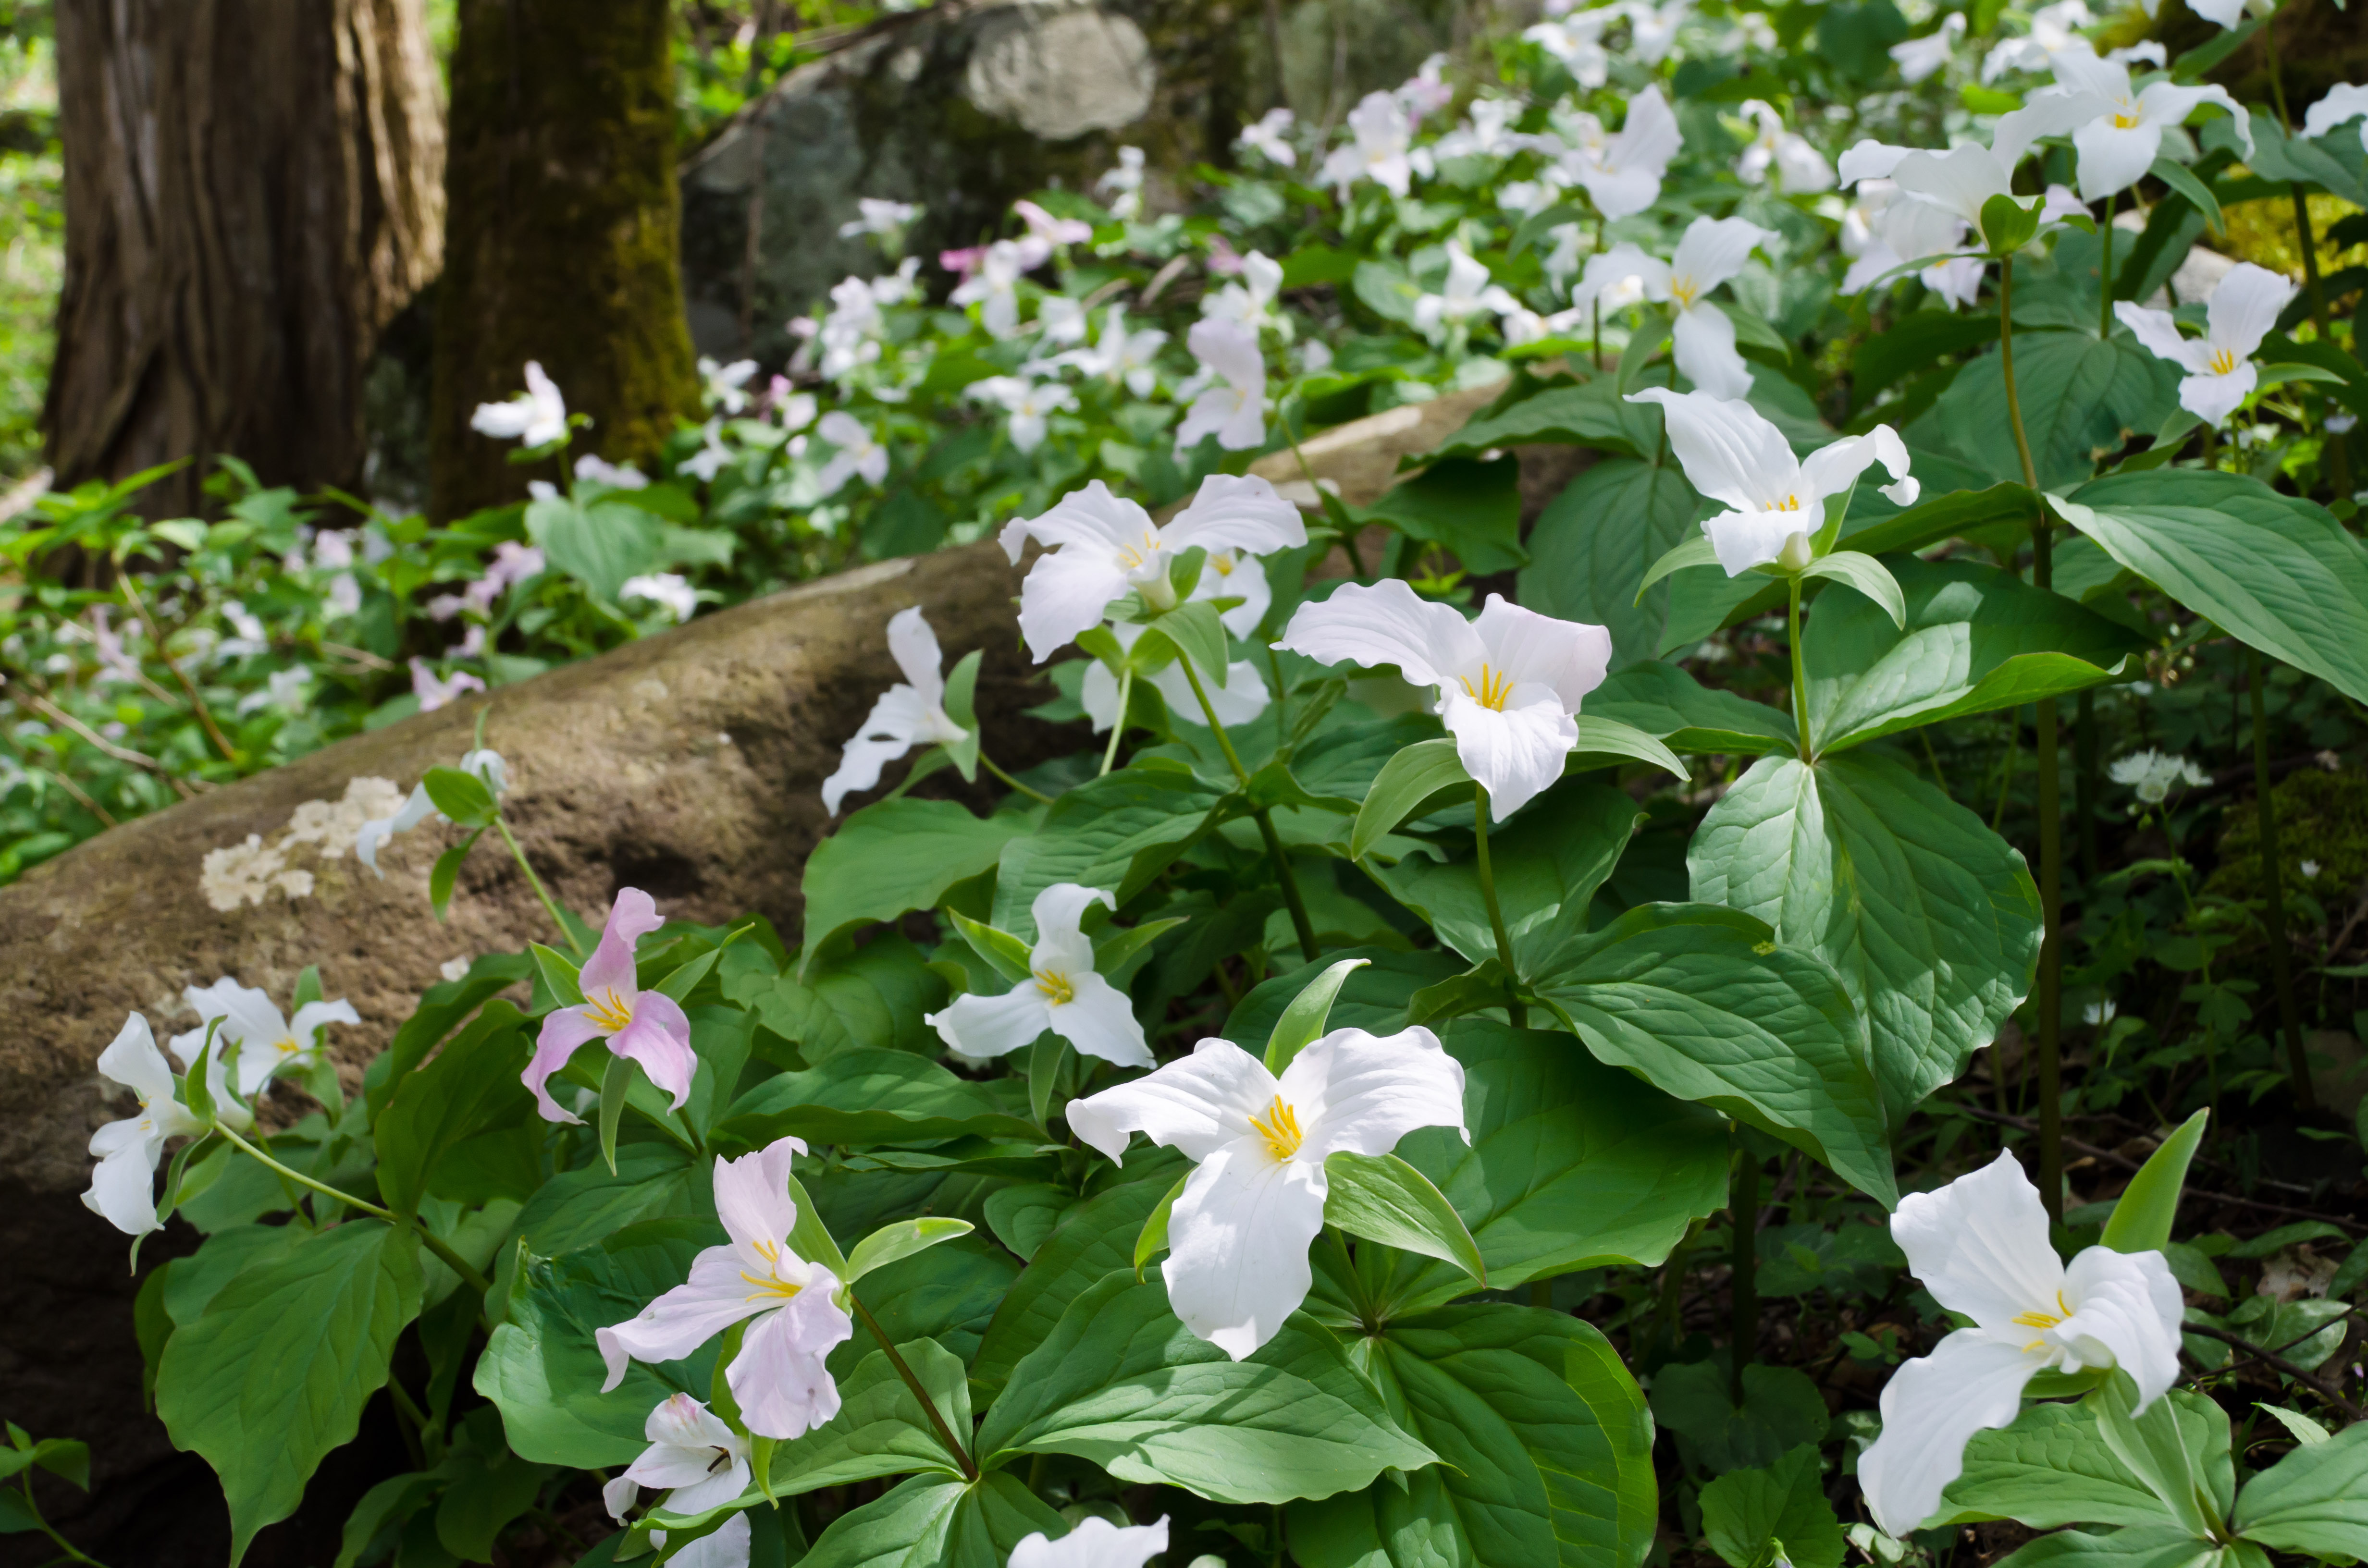 A hillside in the forest covered with white trillium flowers